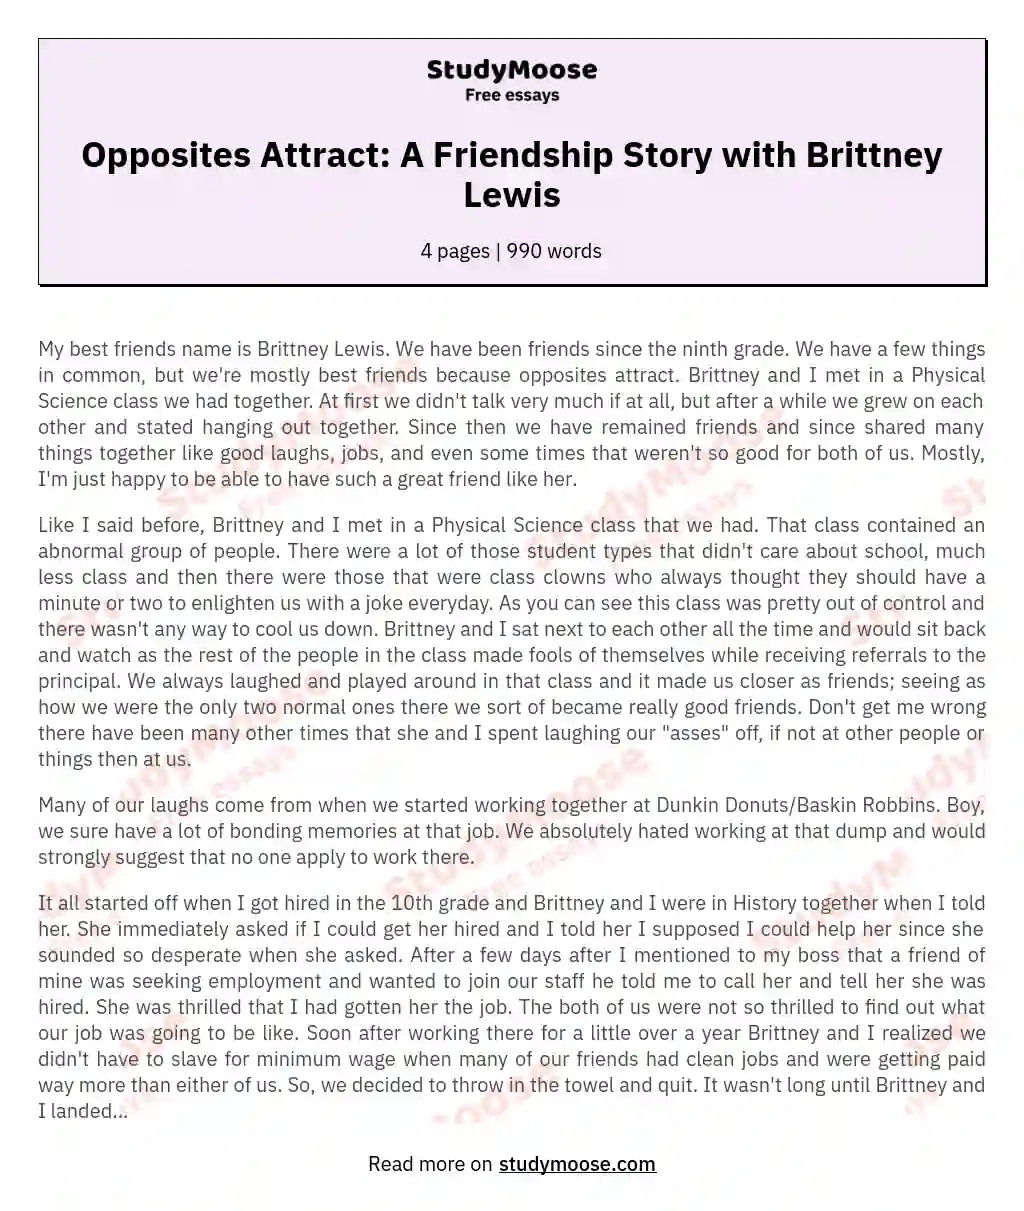 Opposites Attract: A Friendship Story with Brittney Lewis essay